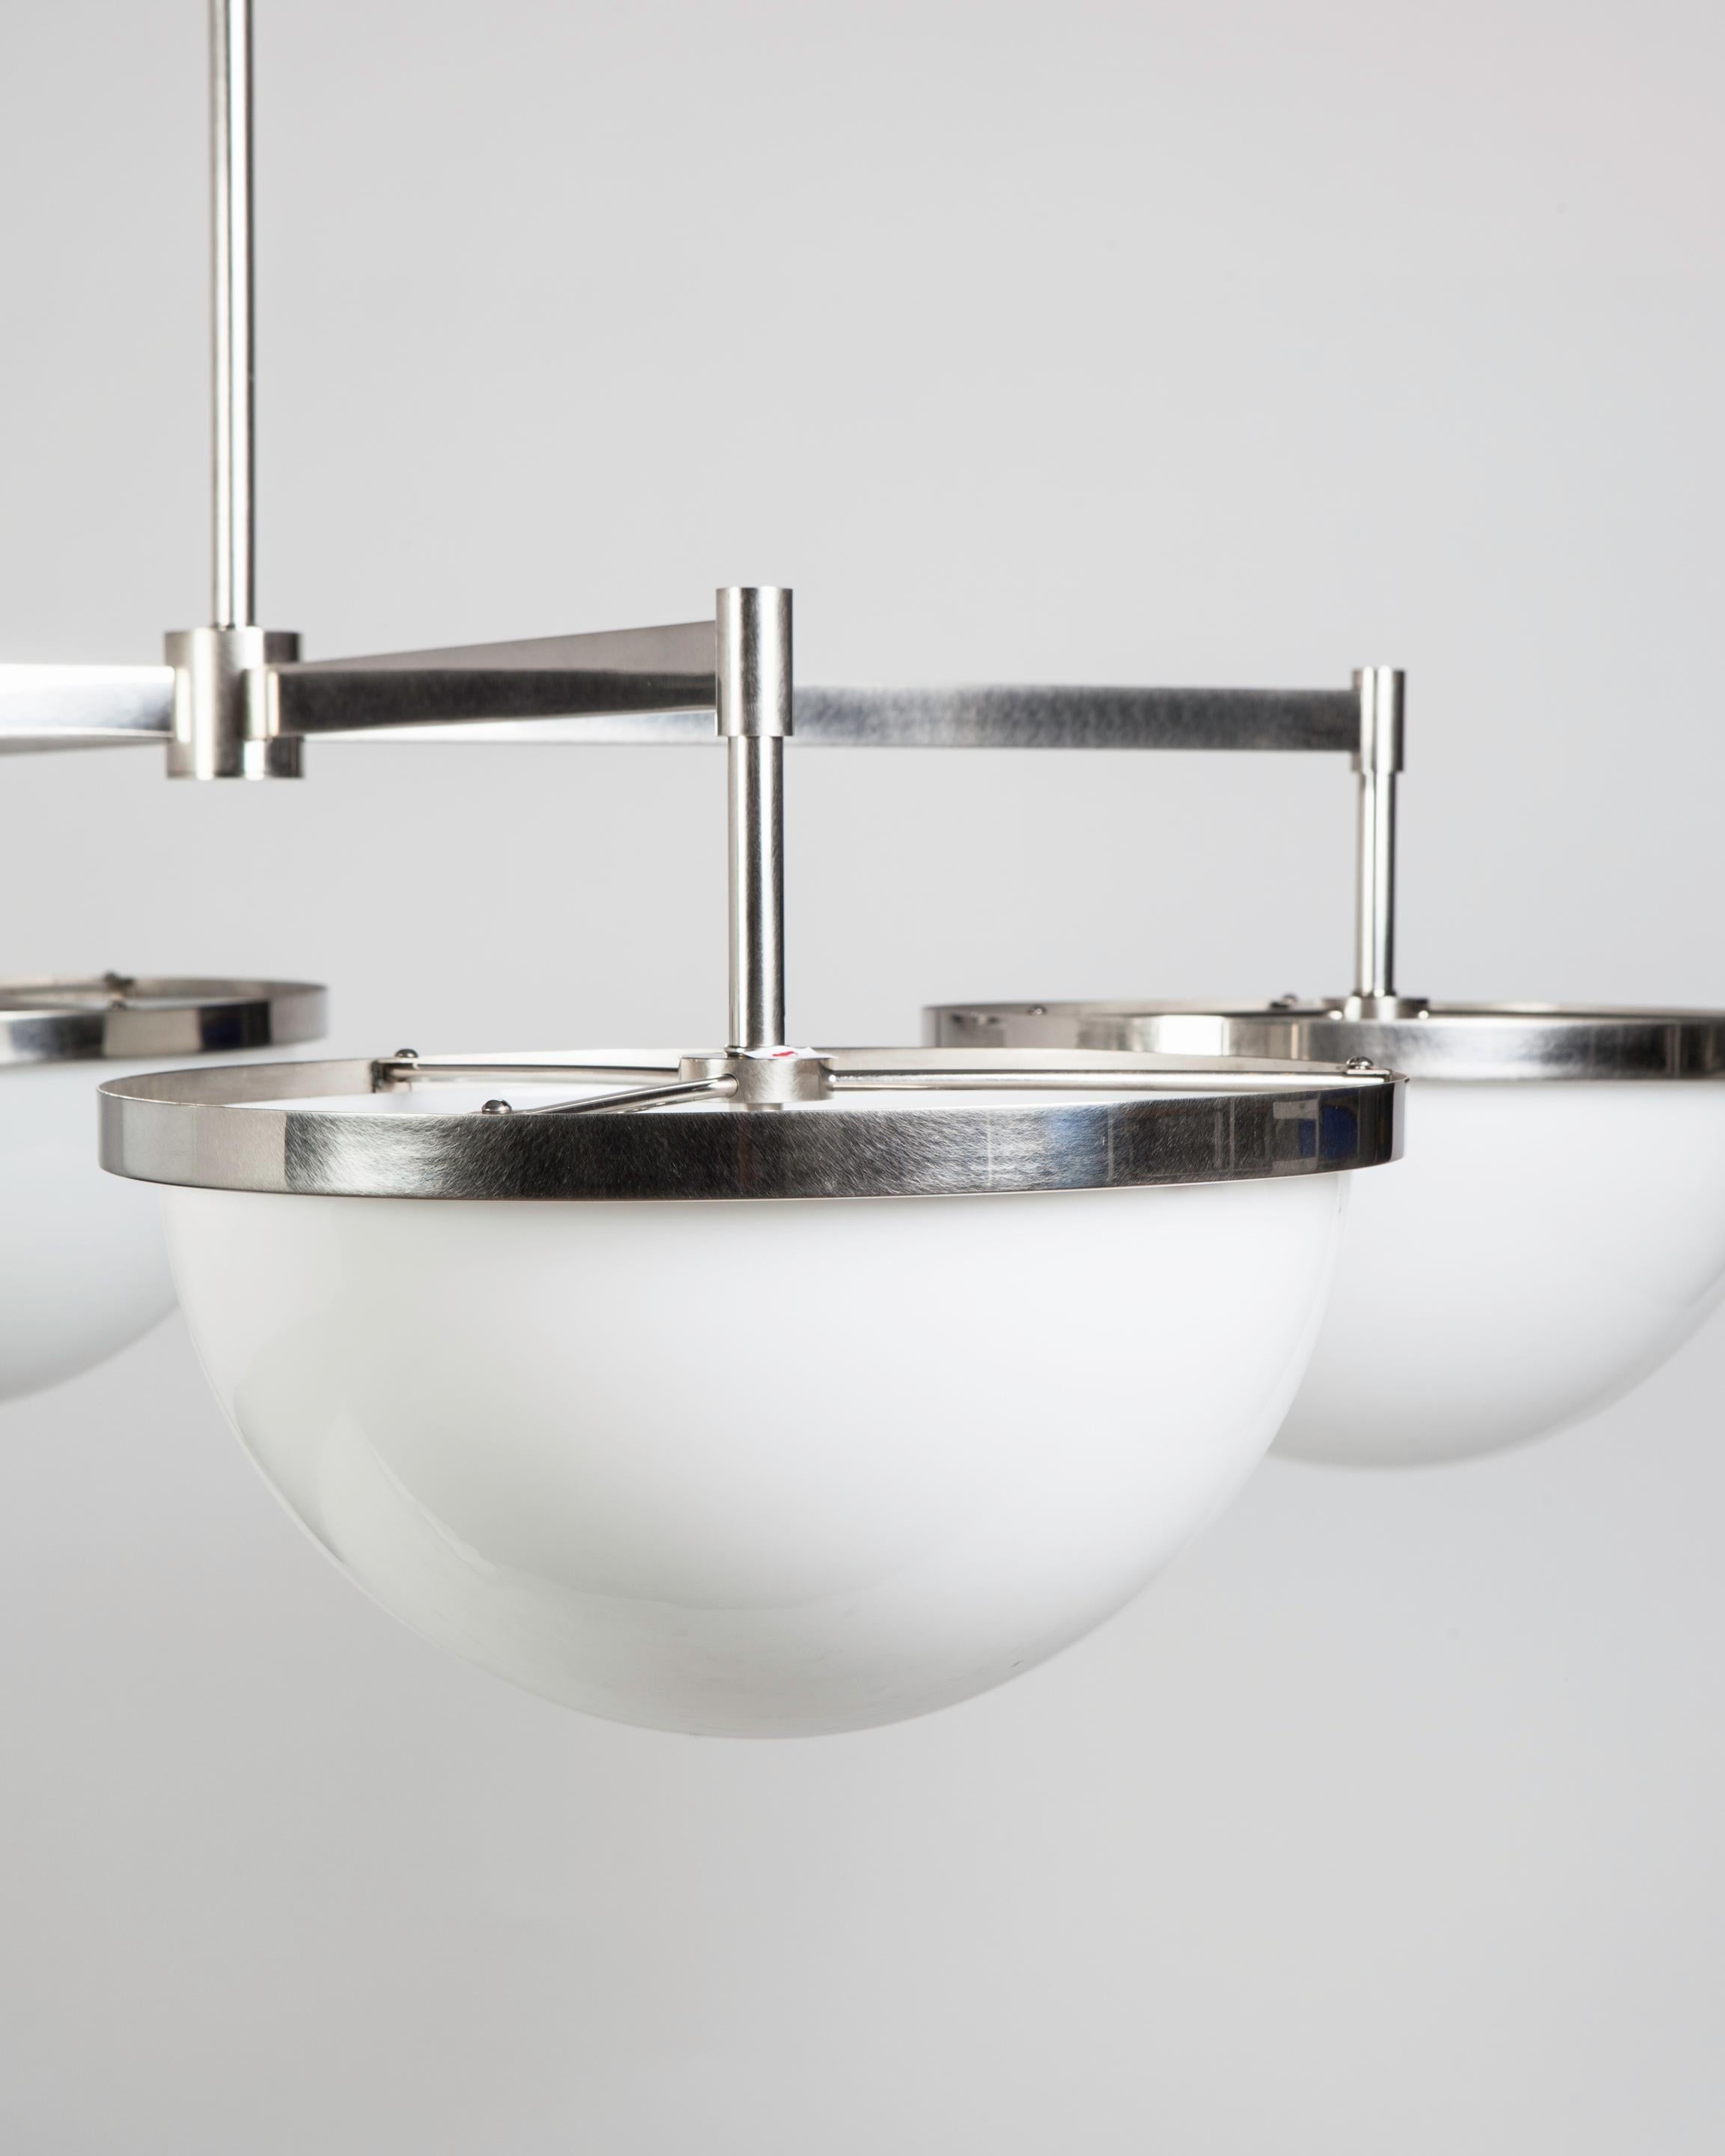 WHL2227.14
Designed by Alan Wanzenberg for Remains Lighting, the four arm Nevins 14 chandelier is the most simple and elemental of fixtures; with a set of four pure milk glass domes suspended in ribbons of unadorned metal, with rectangular